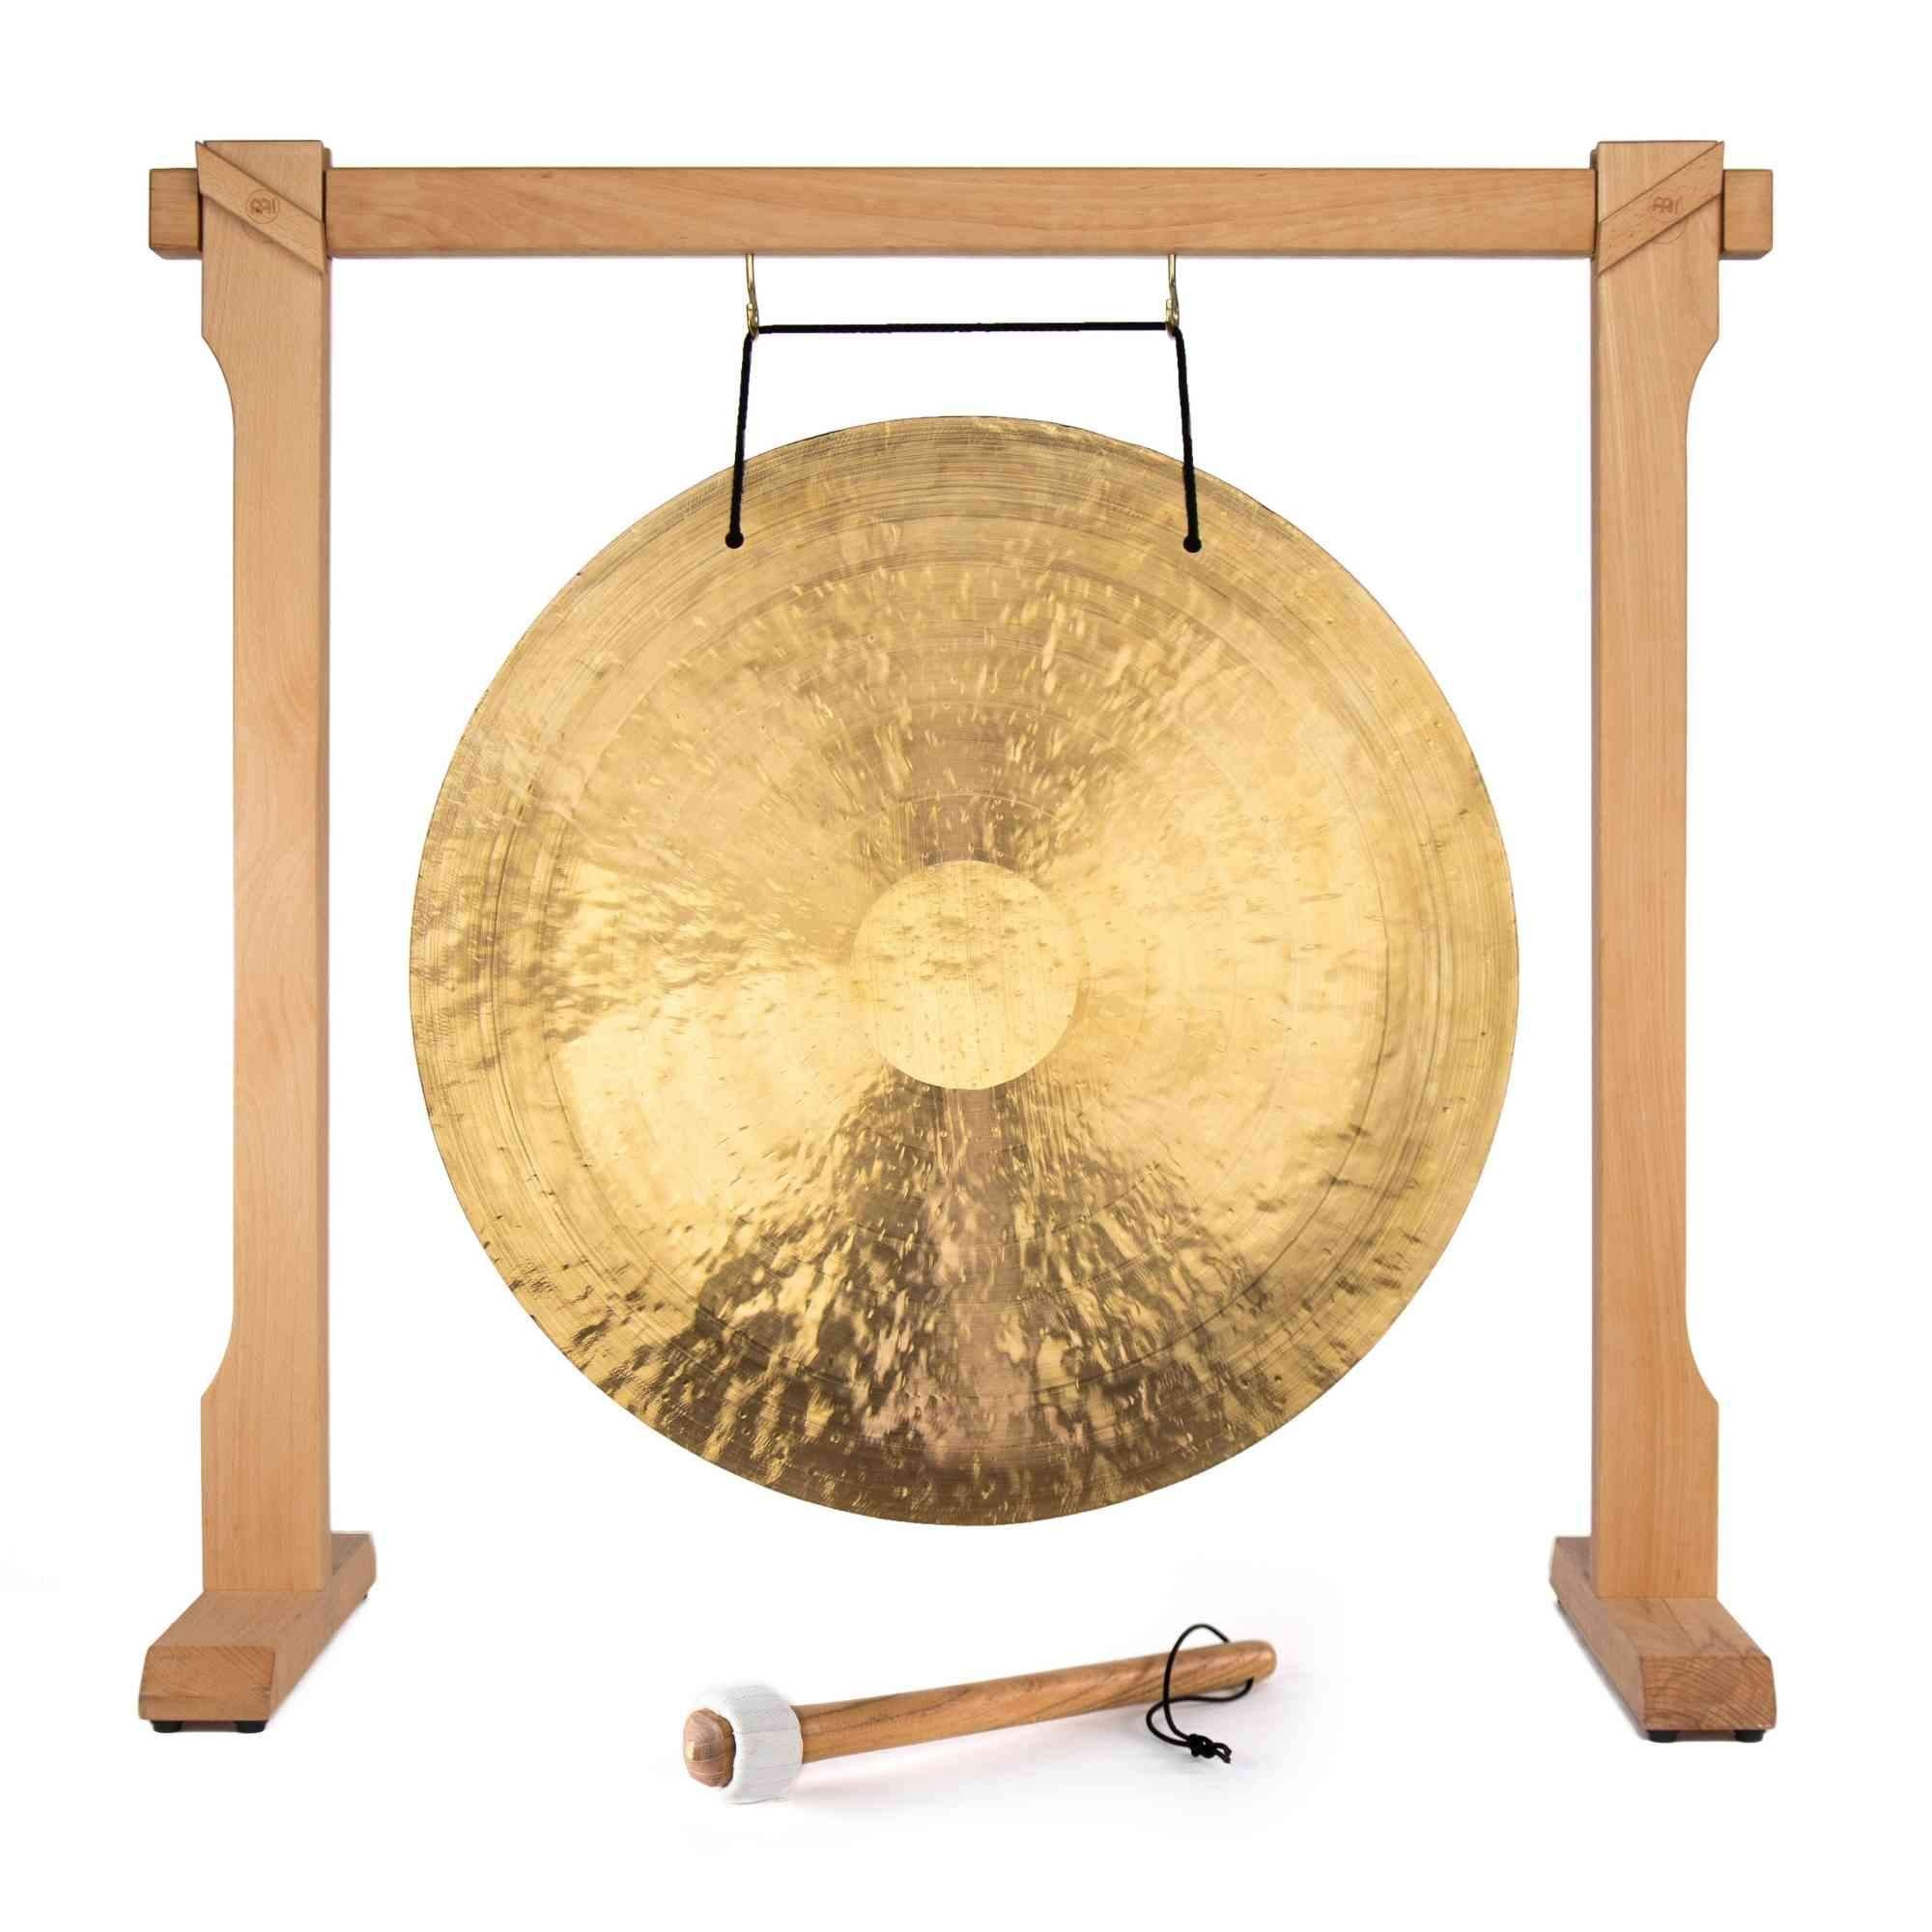 Gong: Hand-selected instrument from Wuhan, China, Wooden stand, Mallet, Hand-hammered bronze. 2000x2000 HD Background.